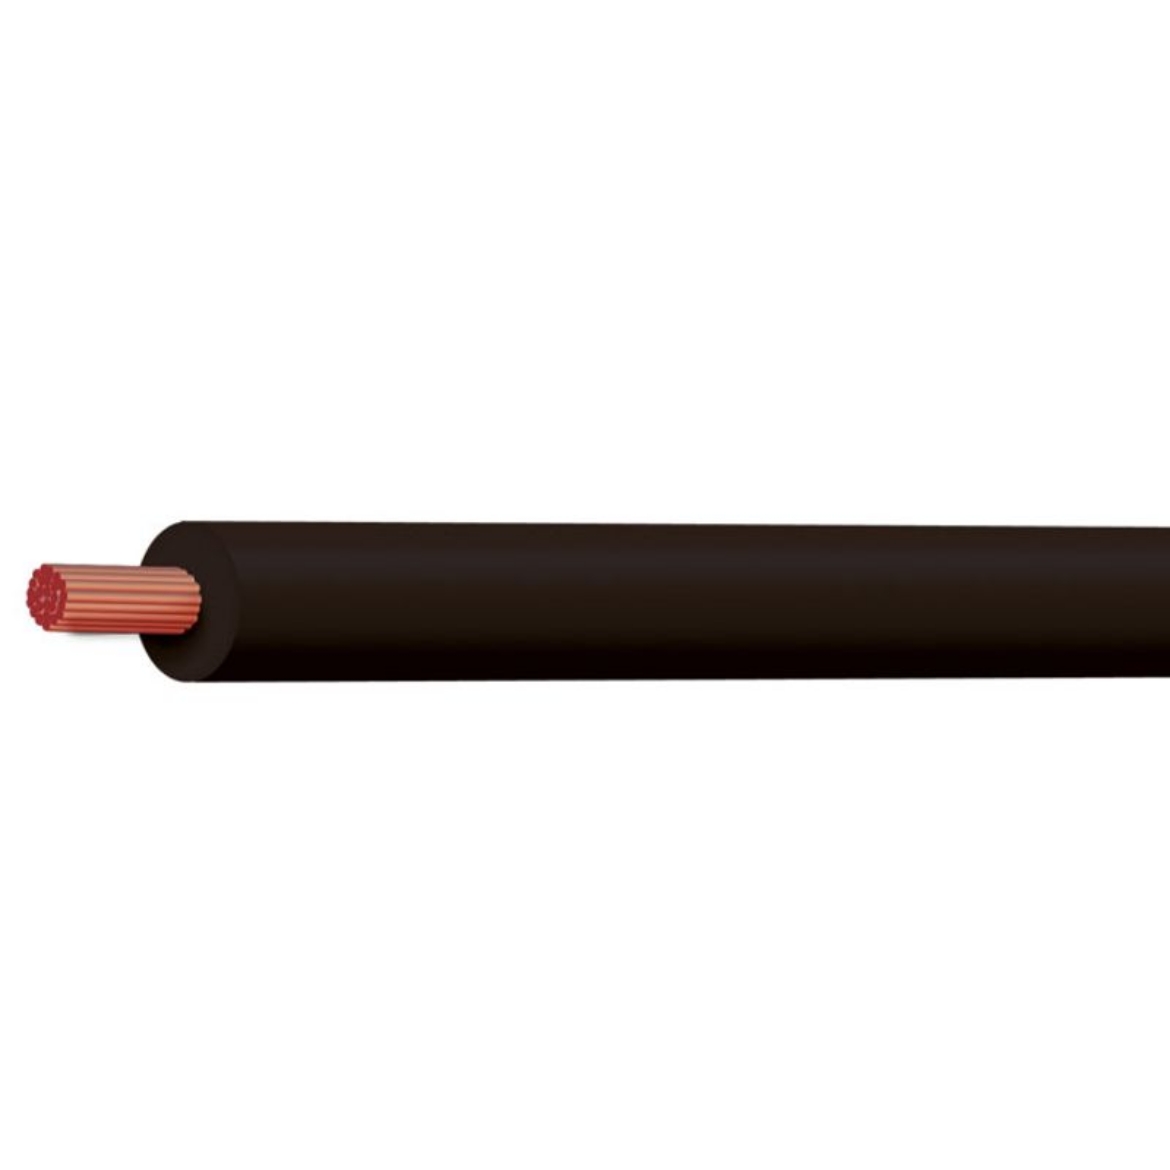 Picture of TYCAB SINGLE CORE CABLE BATTERY 2 B&S CROSS SECT 32.15MM SQ RATING 230A BLACK CUT - PER METER